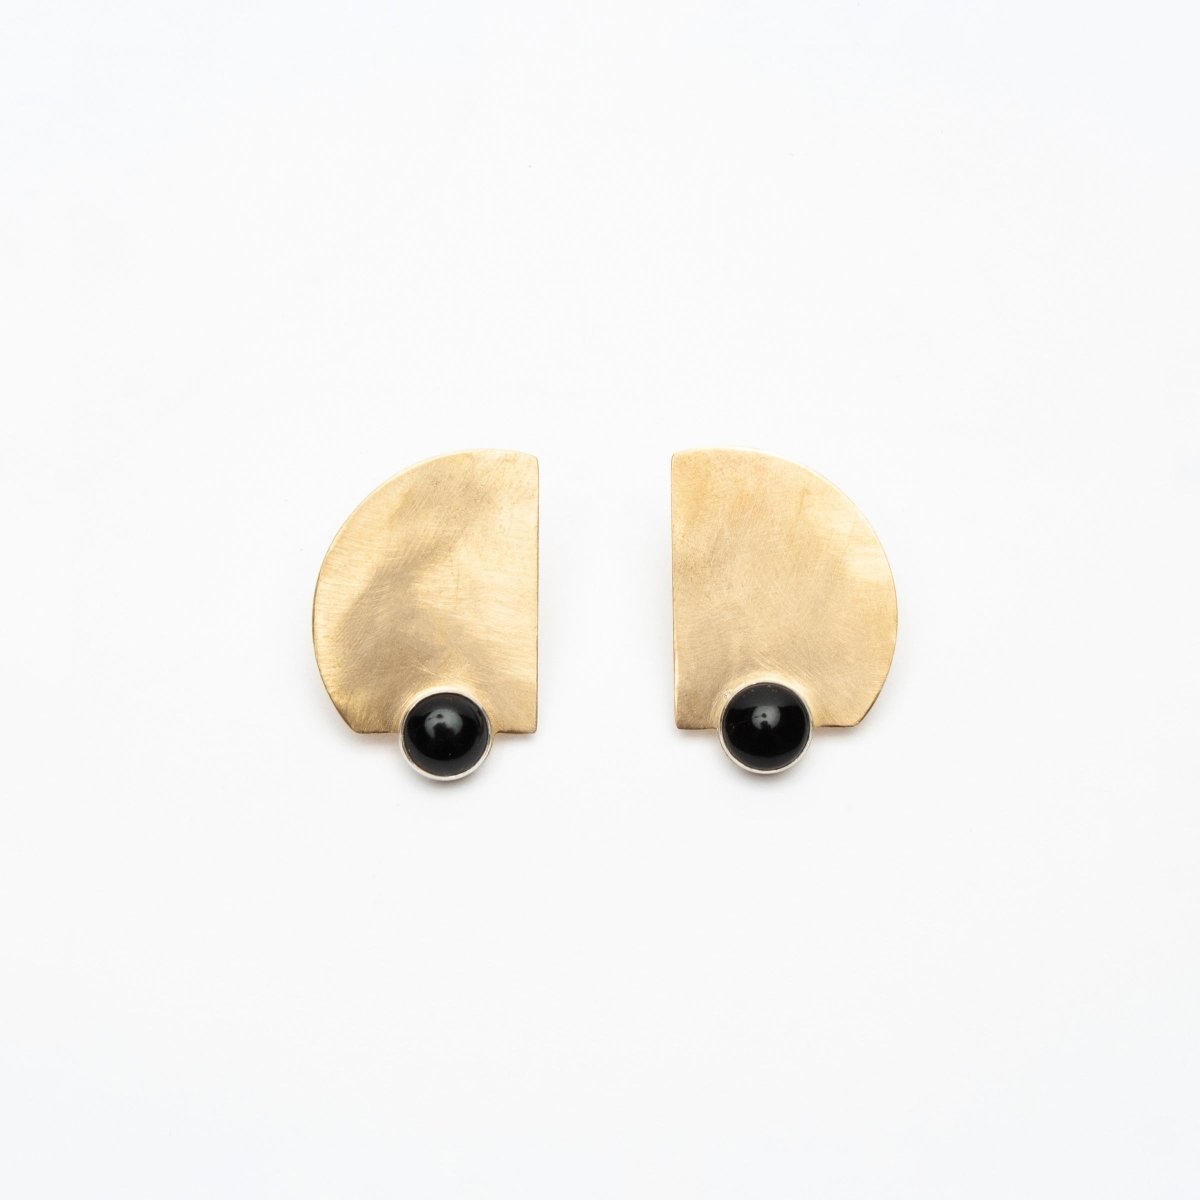 Flat brushed brass stud earrings with a Black Onyx stone setting at the bottom. Designed by Kari Phillips in Portland, Oregon.